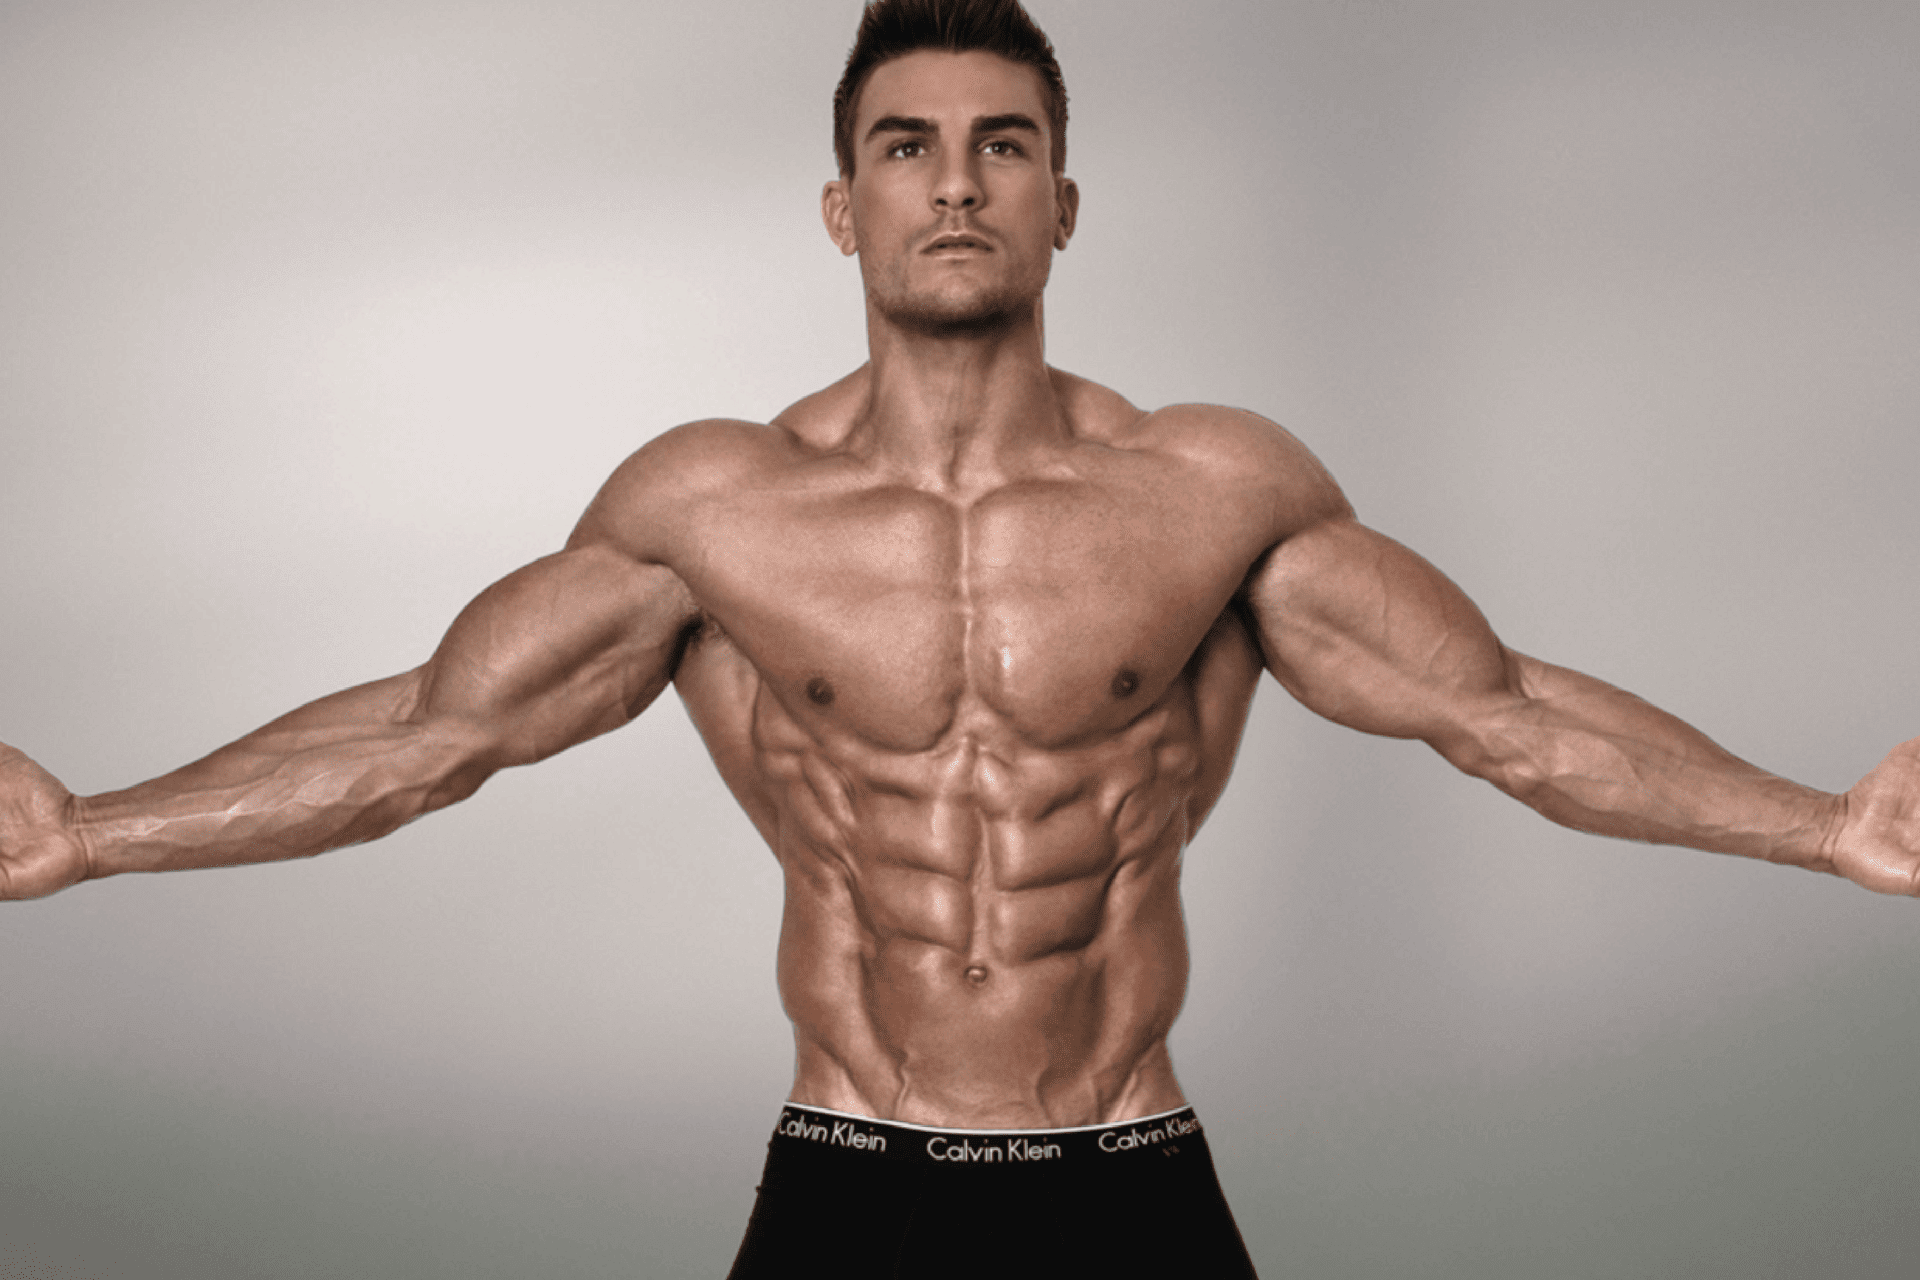 Best Supplements to Get Ripped and Shred/Cut Muscles Easily in 2020.